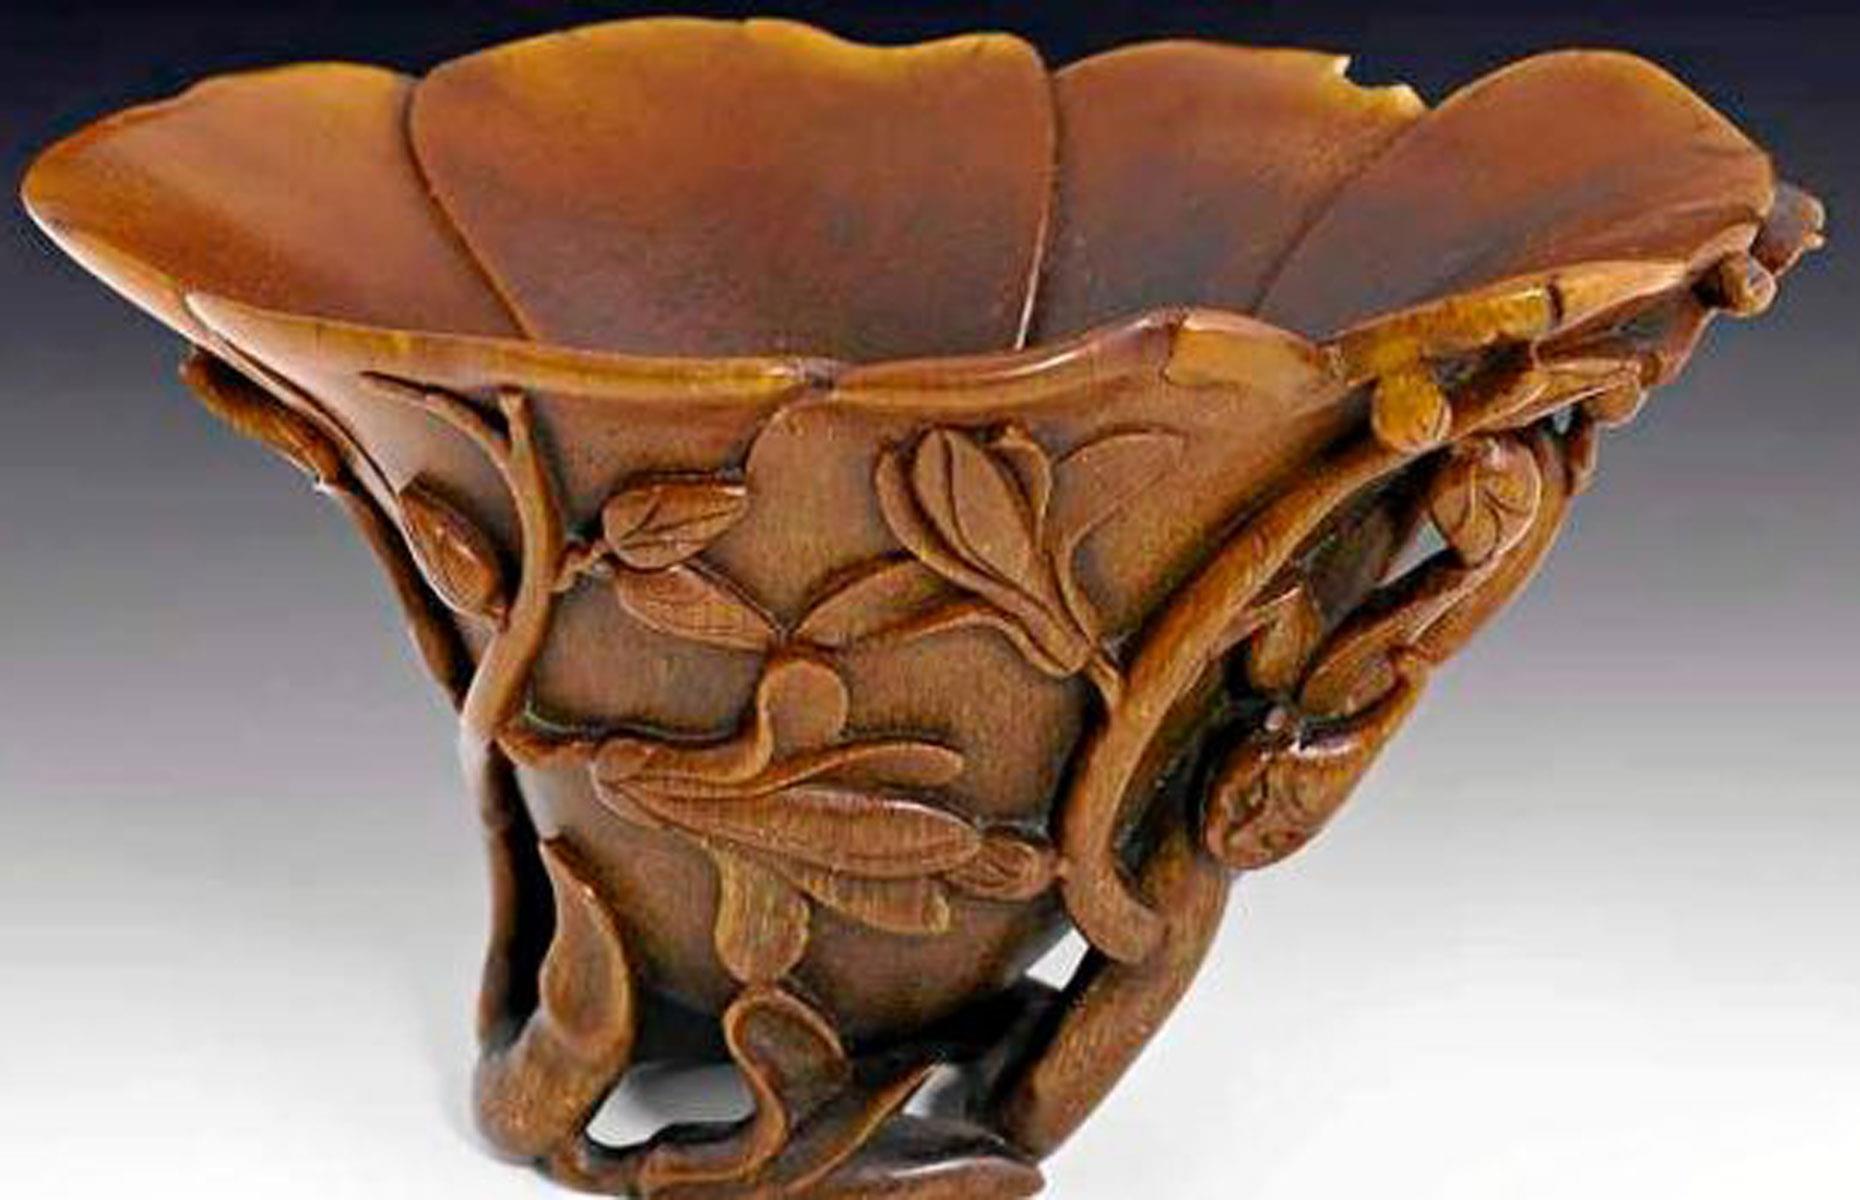 The 17th-century Chinese cup